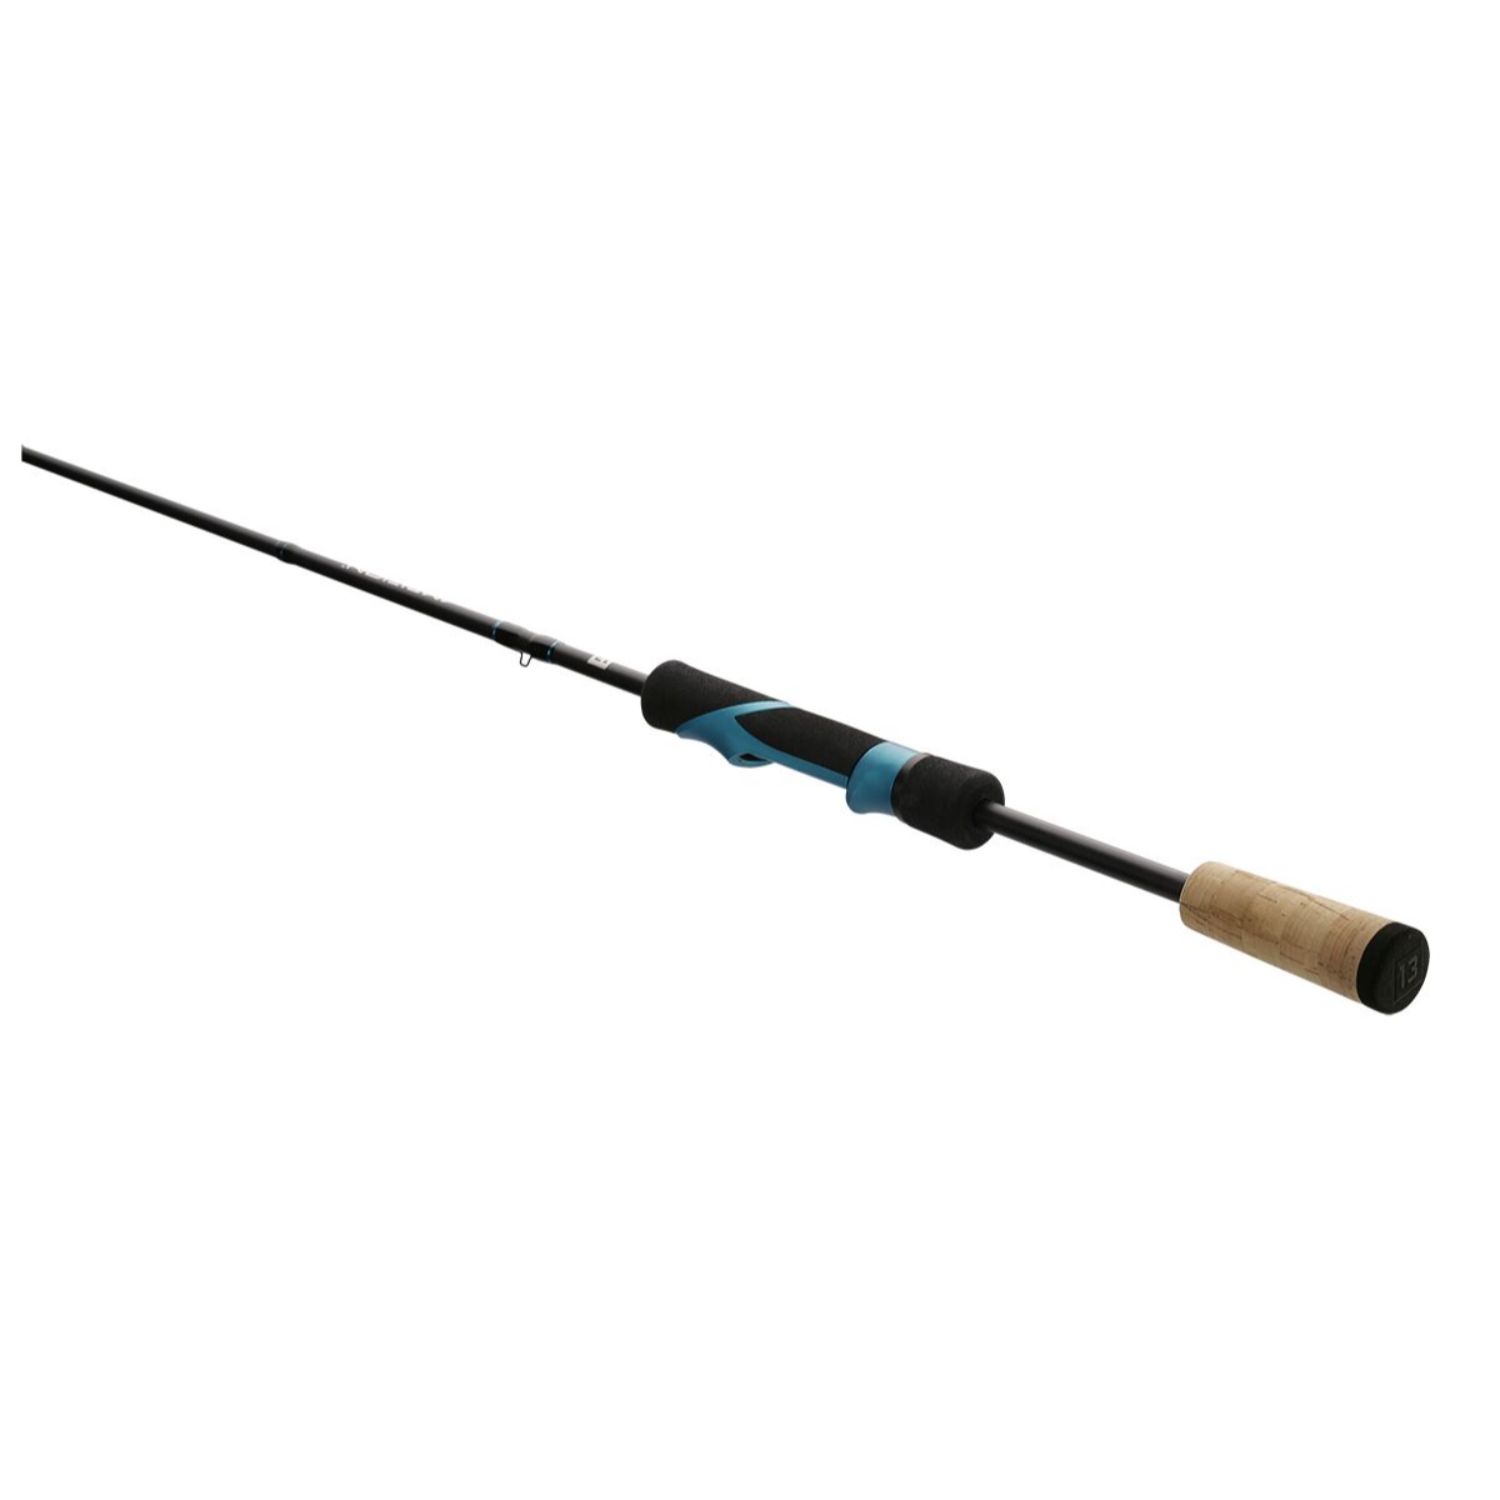 13 Fishing Ambition 5 ft M Spinning Rod